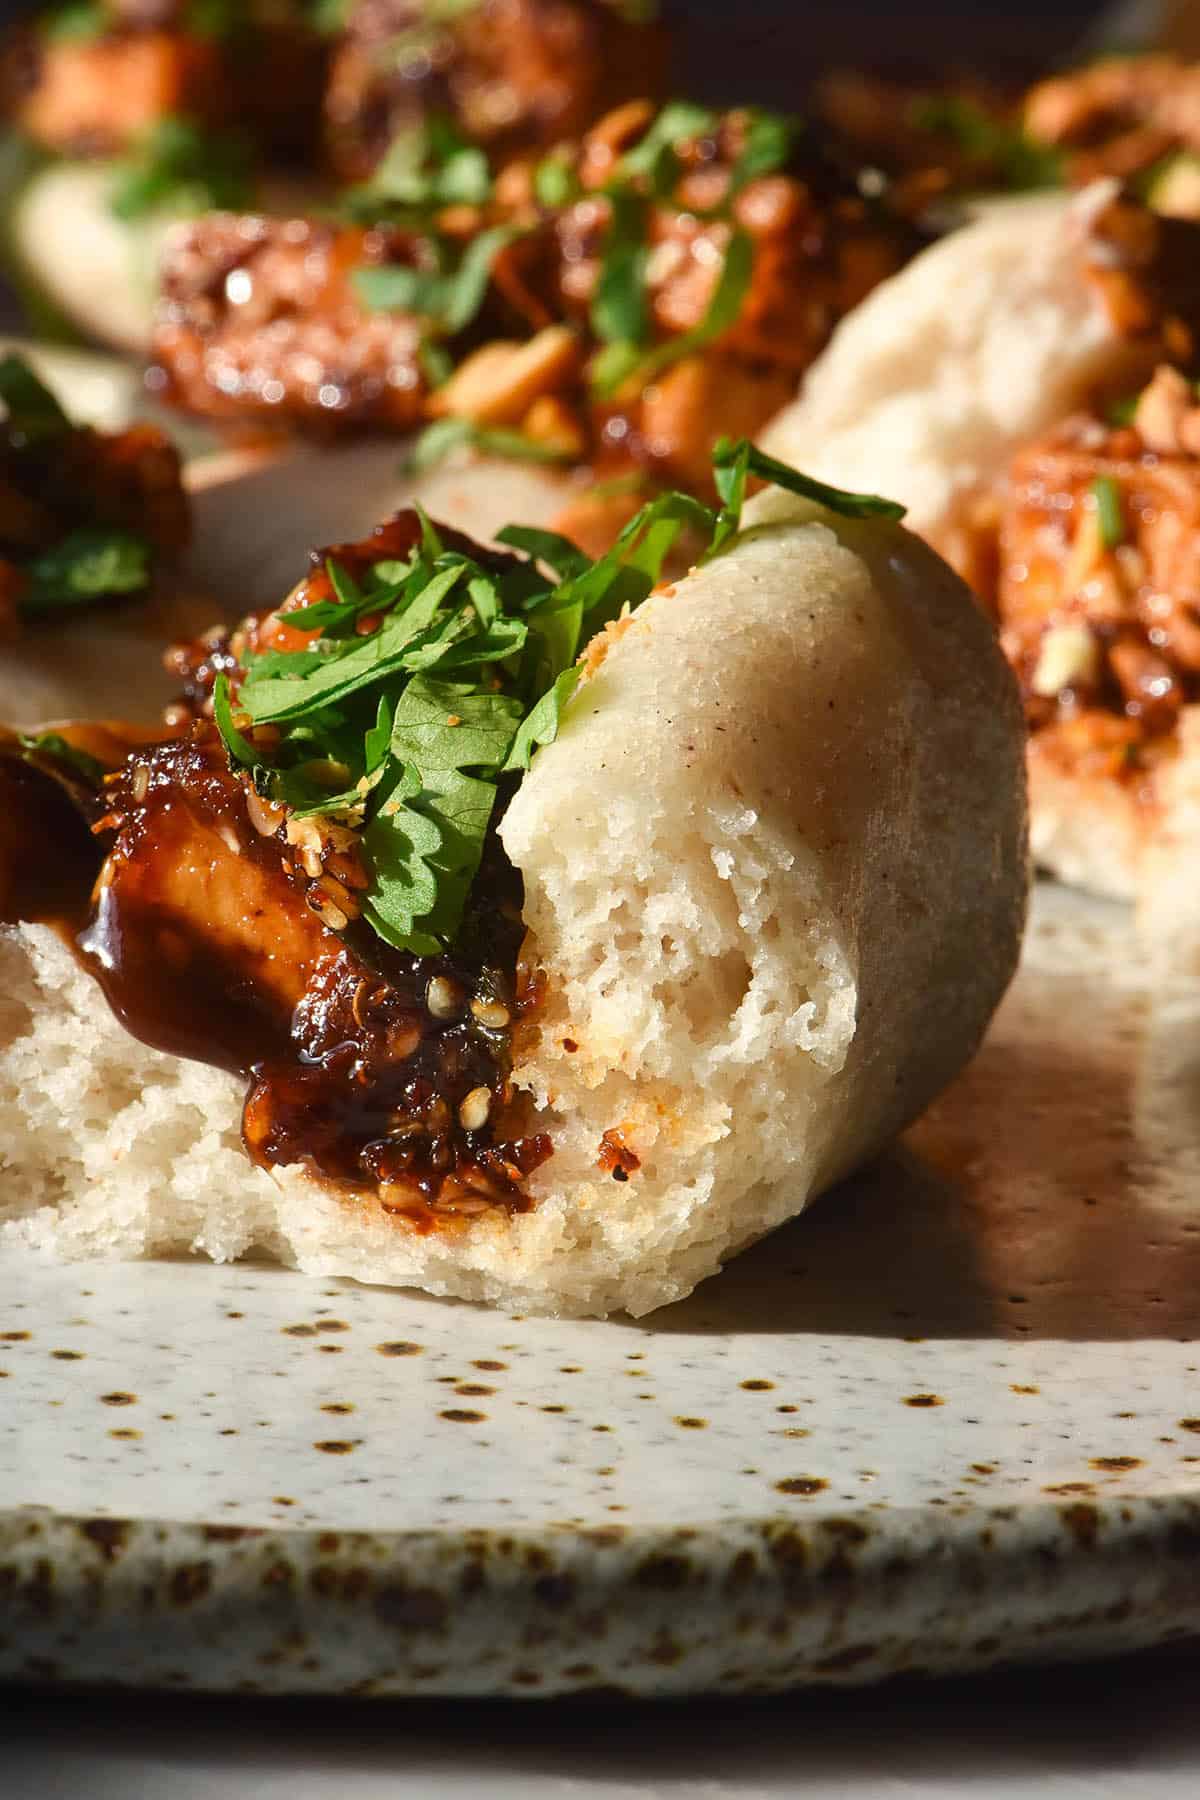 A close up image of gluten free bao buns on a white speckled ceramic plate. The front bao bun has been bitten into, revealing the soft white crumb and the saucy tofu filling. 